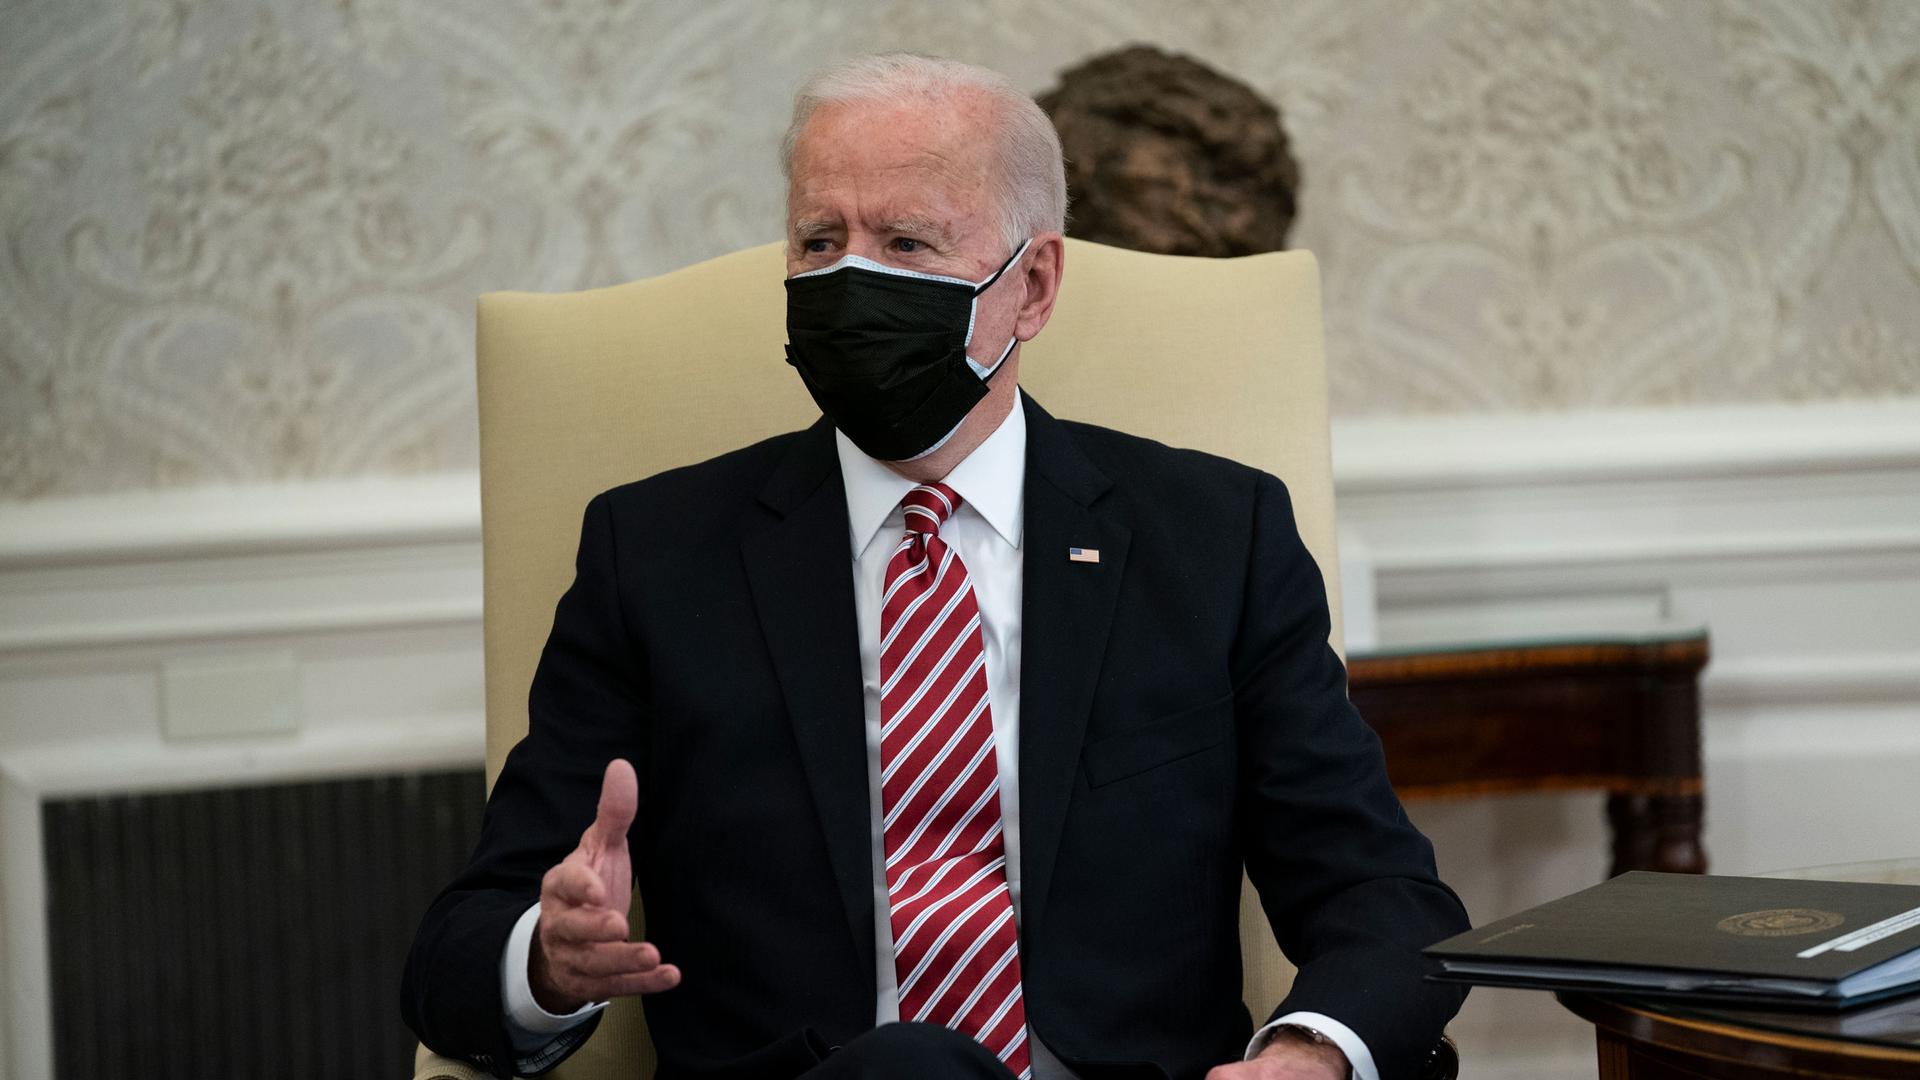 President Joe Biden wearing a dark suit and red and white tie along with a face mask while sitting.